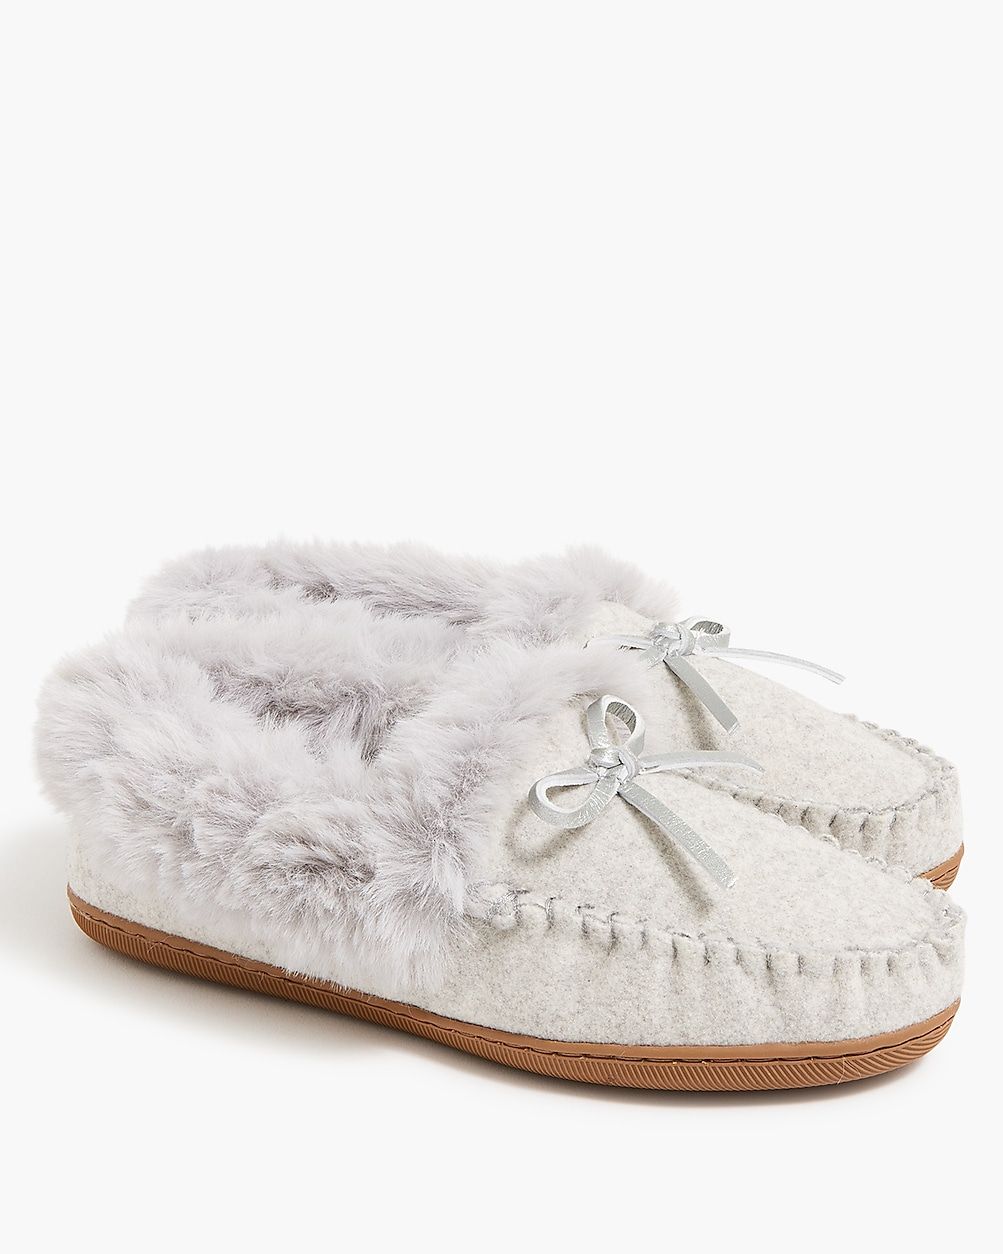 Shearling-lined slippers | J.Crew Factory